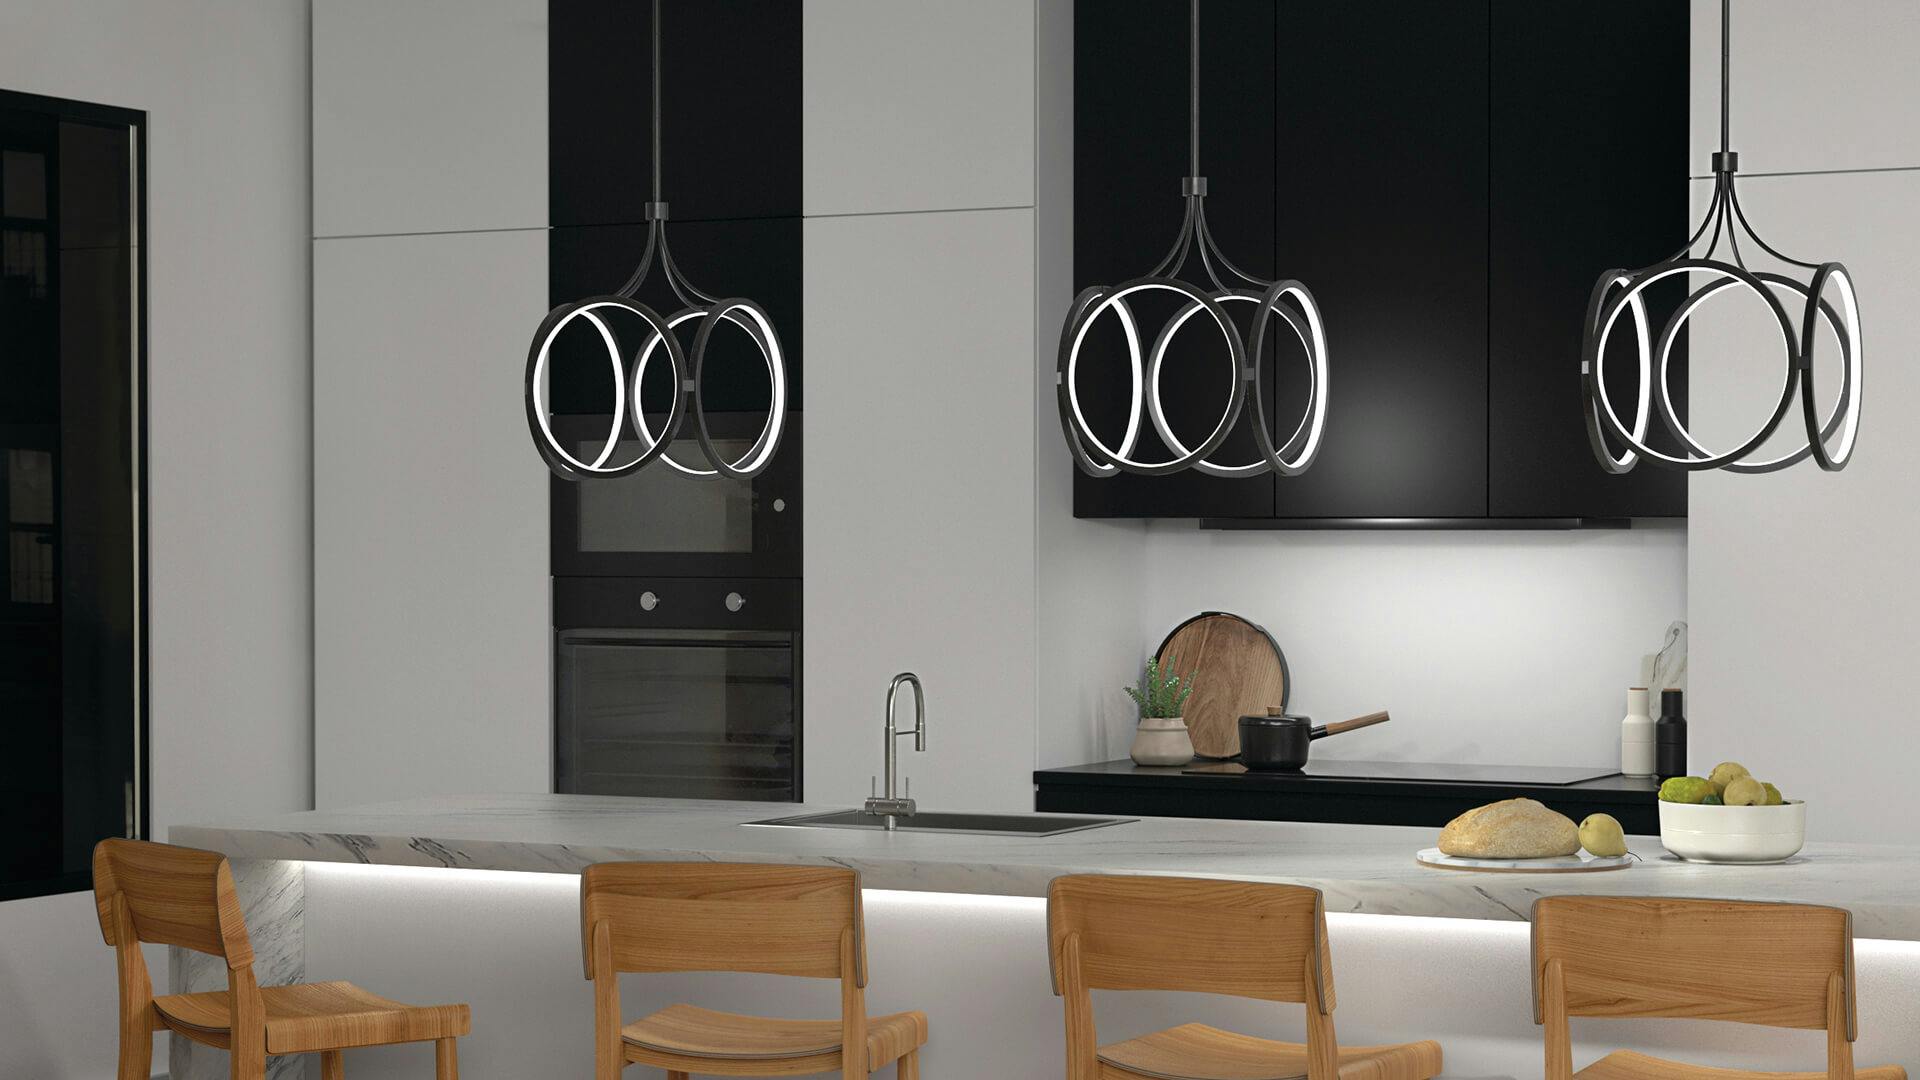 Kitchen at night with three Ciri pendants in black hanging above a long marble island